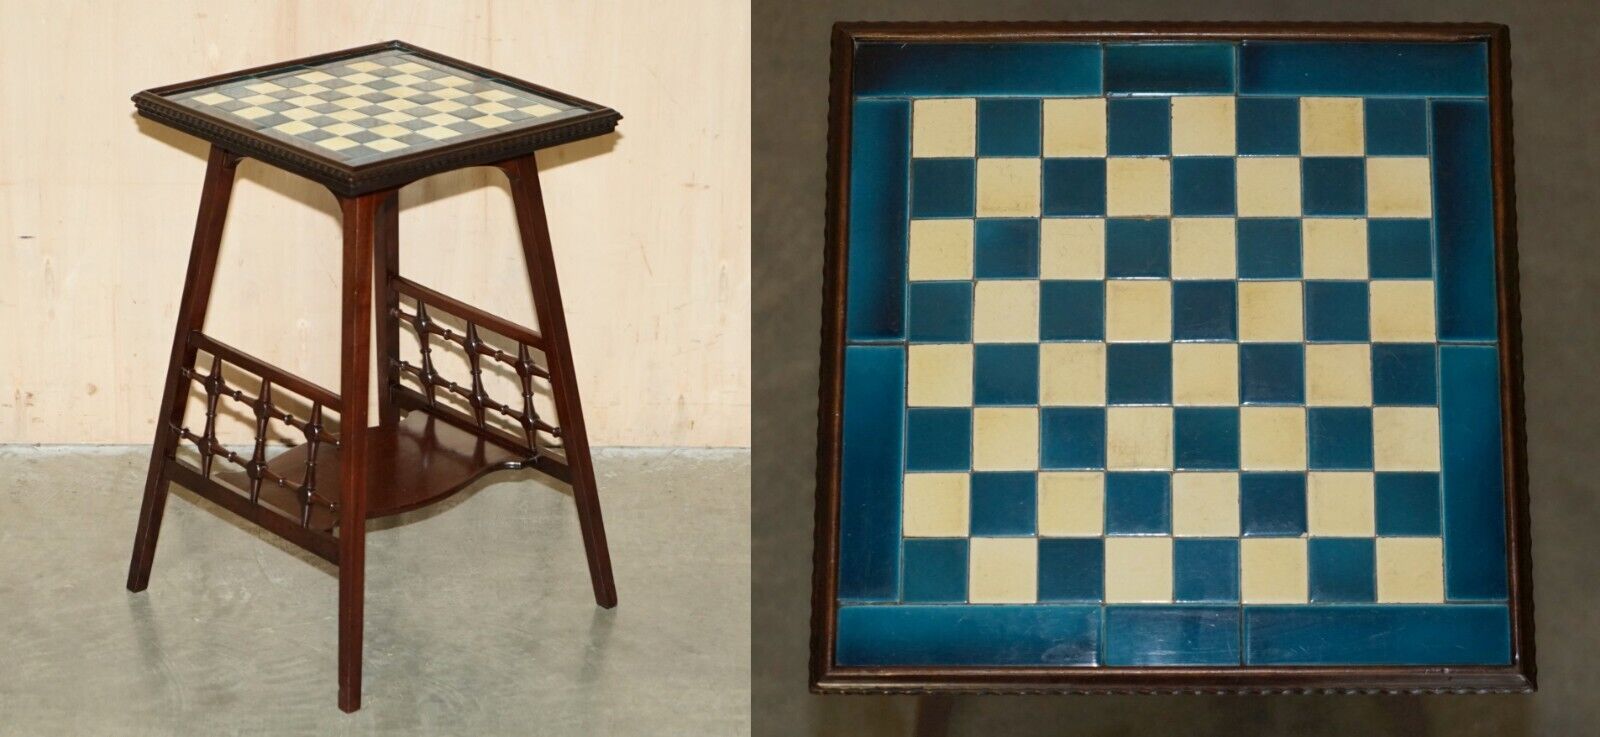 ANTIQUE VICTORIAN AESTHETIC MOVEMENT STYLE TILED TOP CHESSBOARD CHESS TABLE